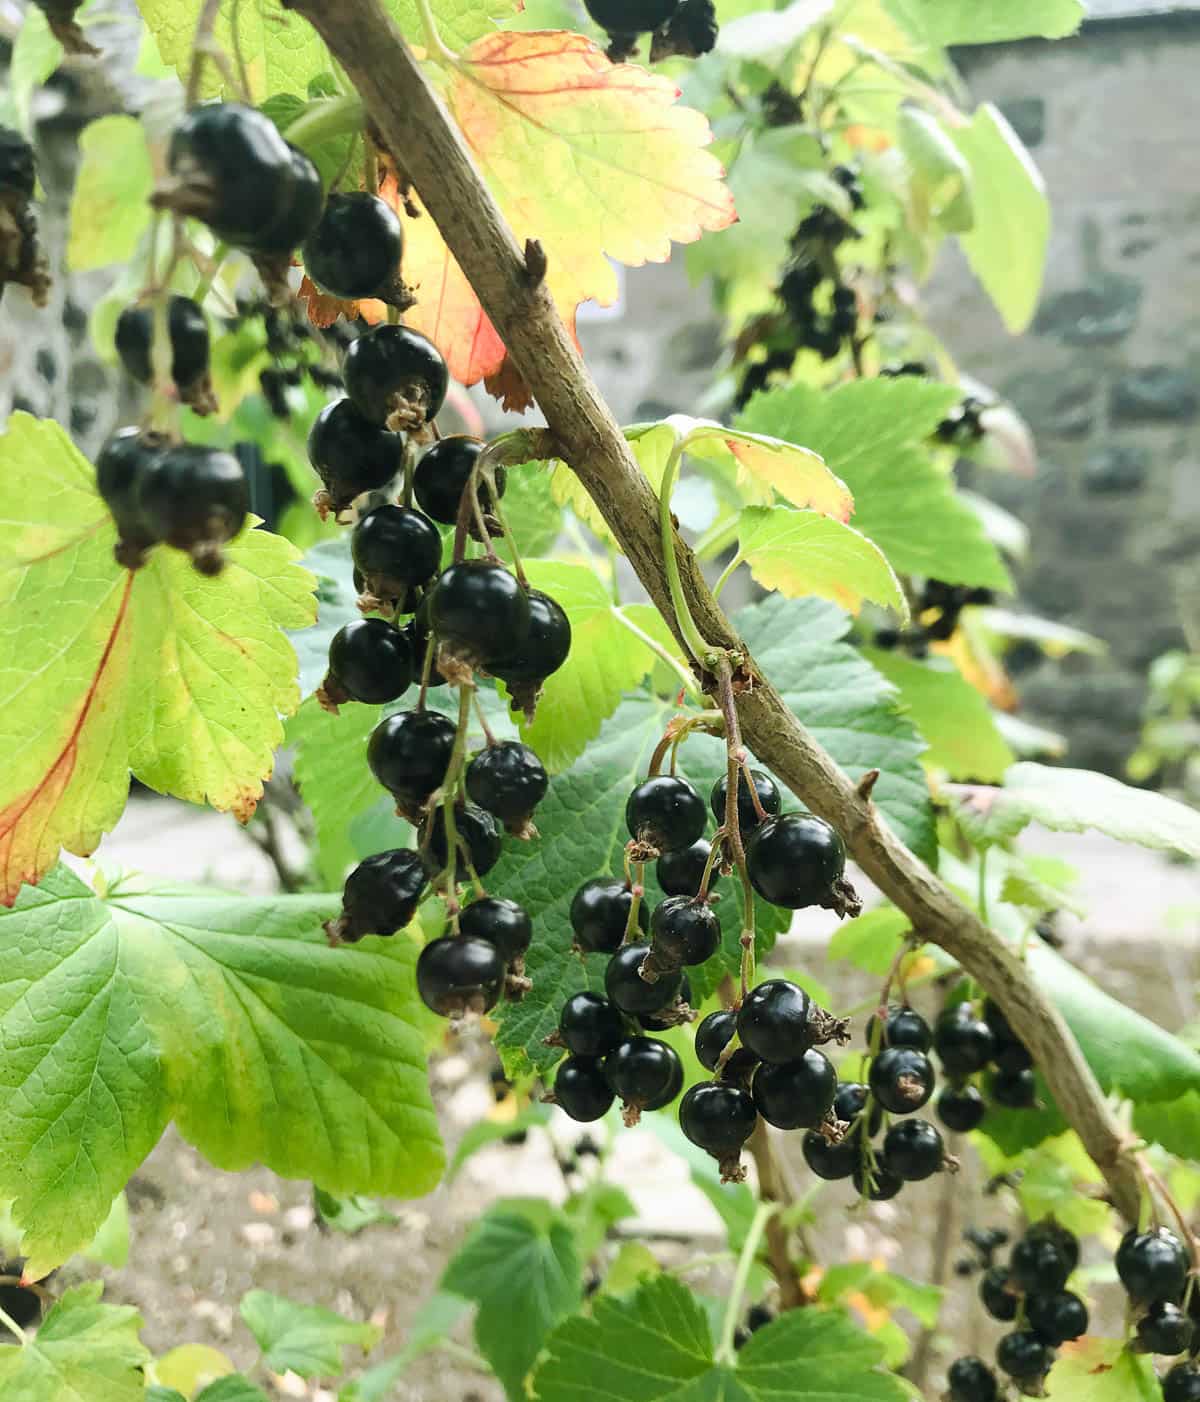 A branch of a blackcurrant bush filled with ripe berries ready for picking.